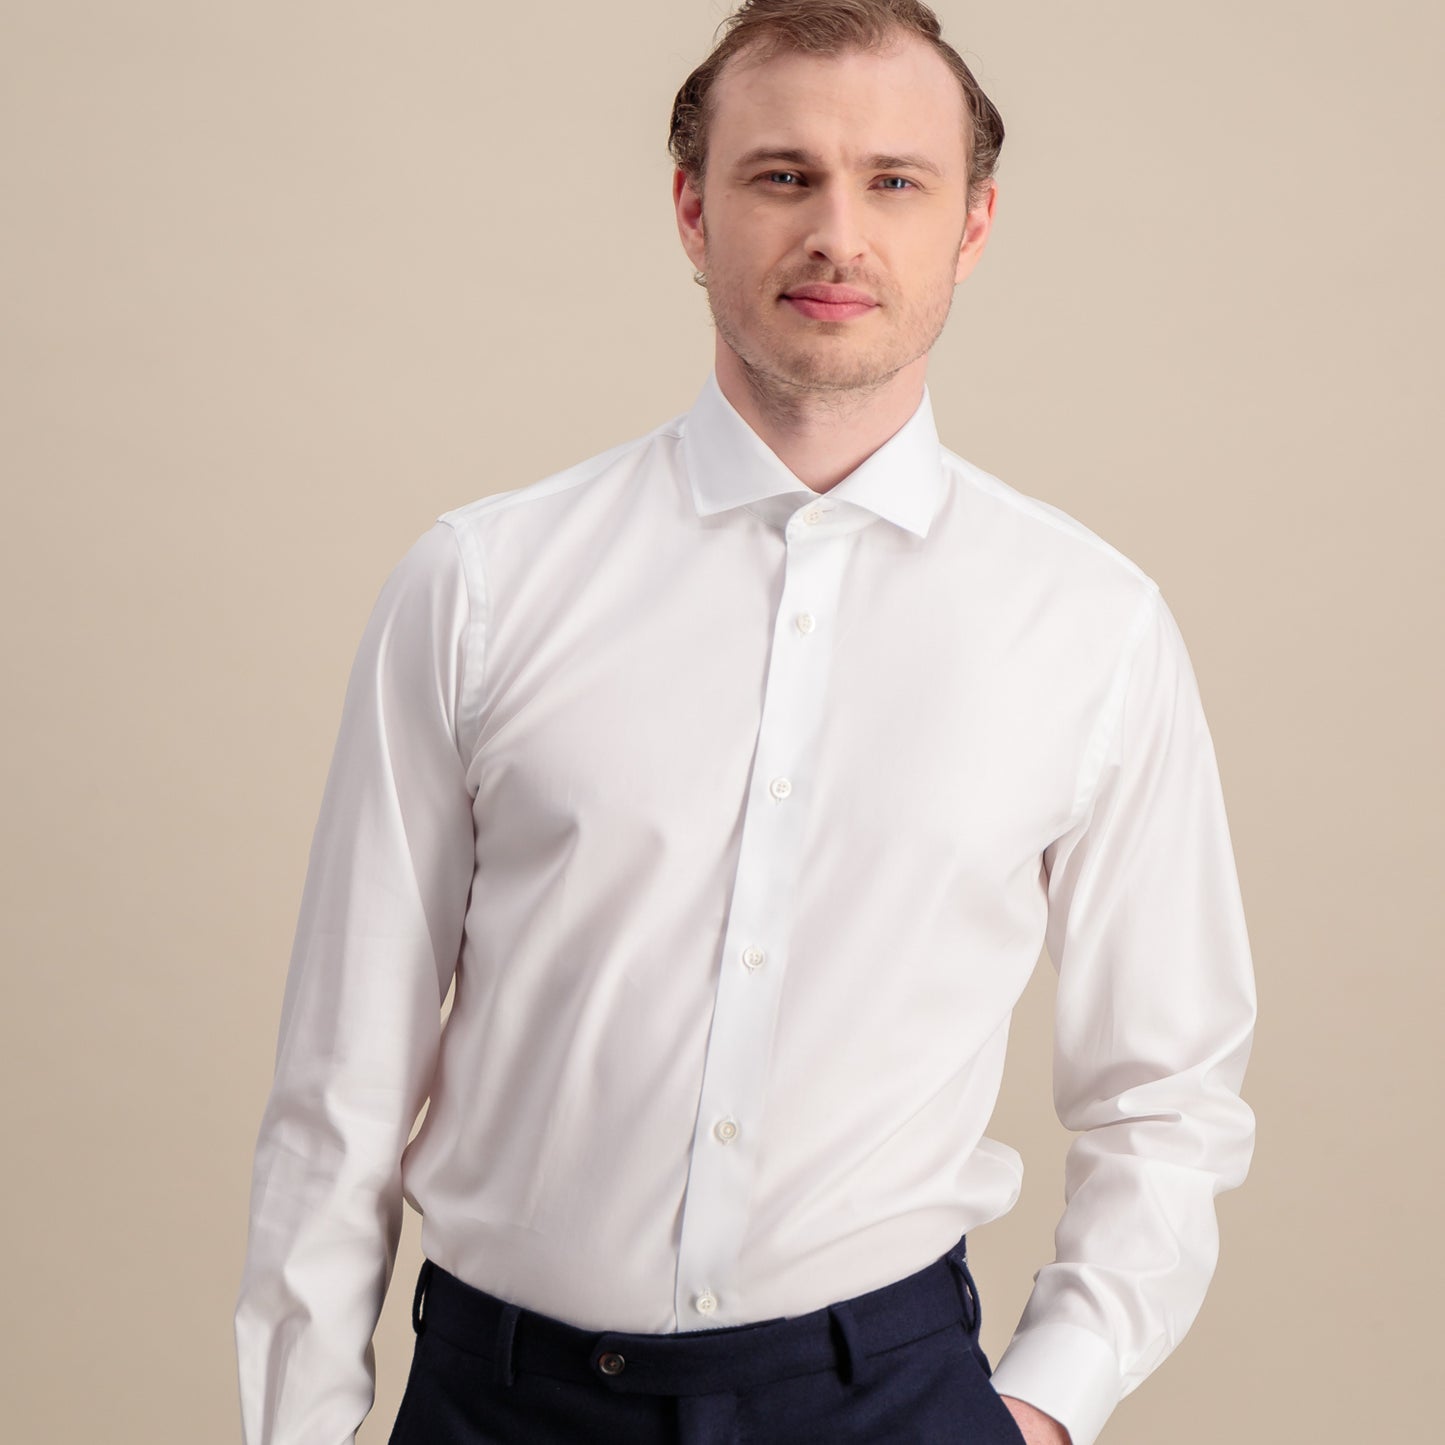 Fitted shirt in natural stretch white twill